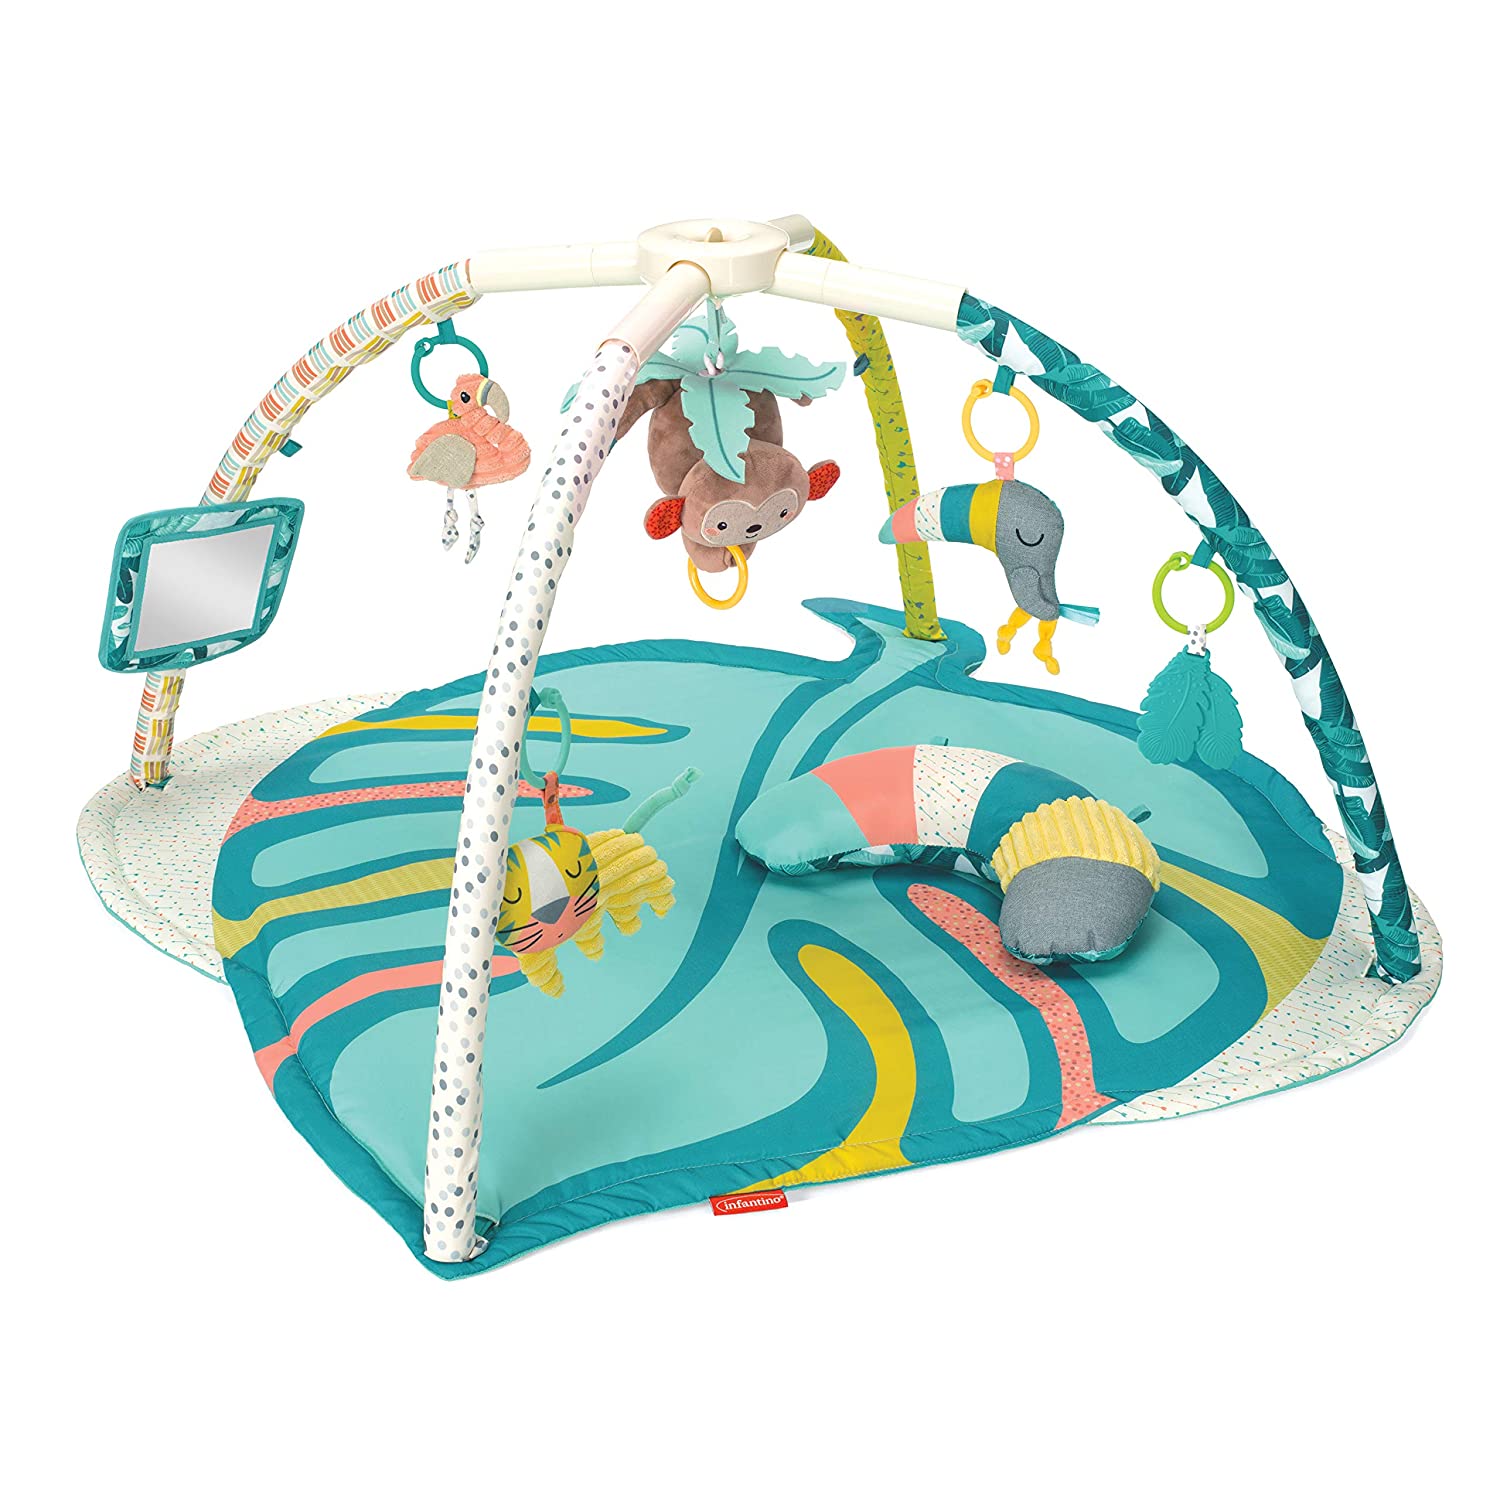 BABY PLAY GYM AND MAT